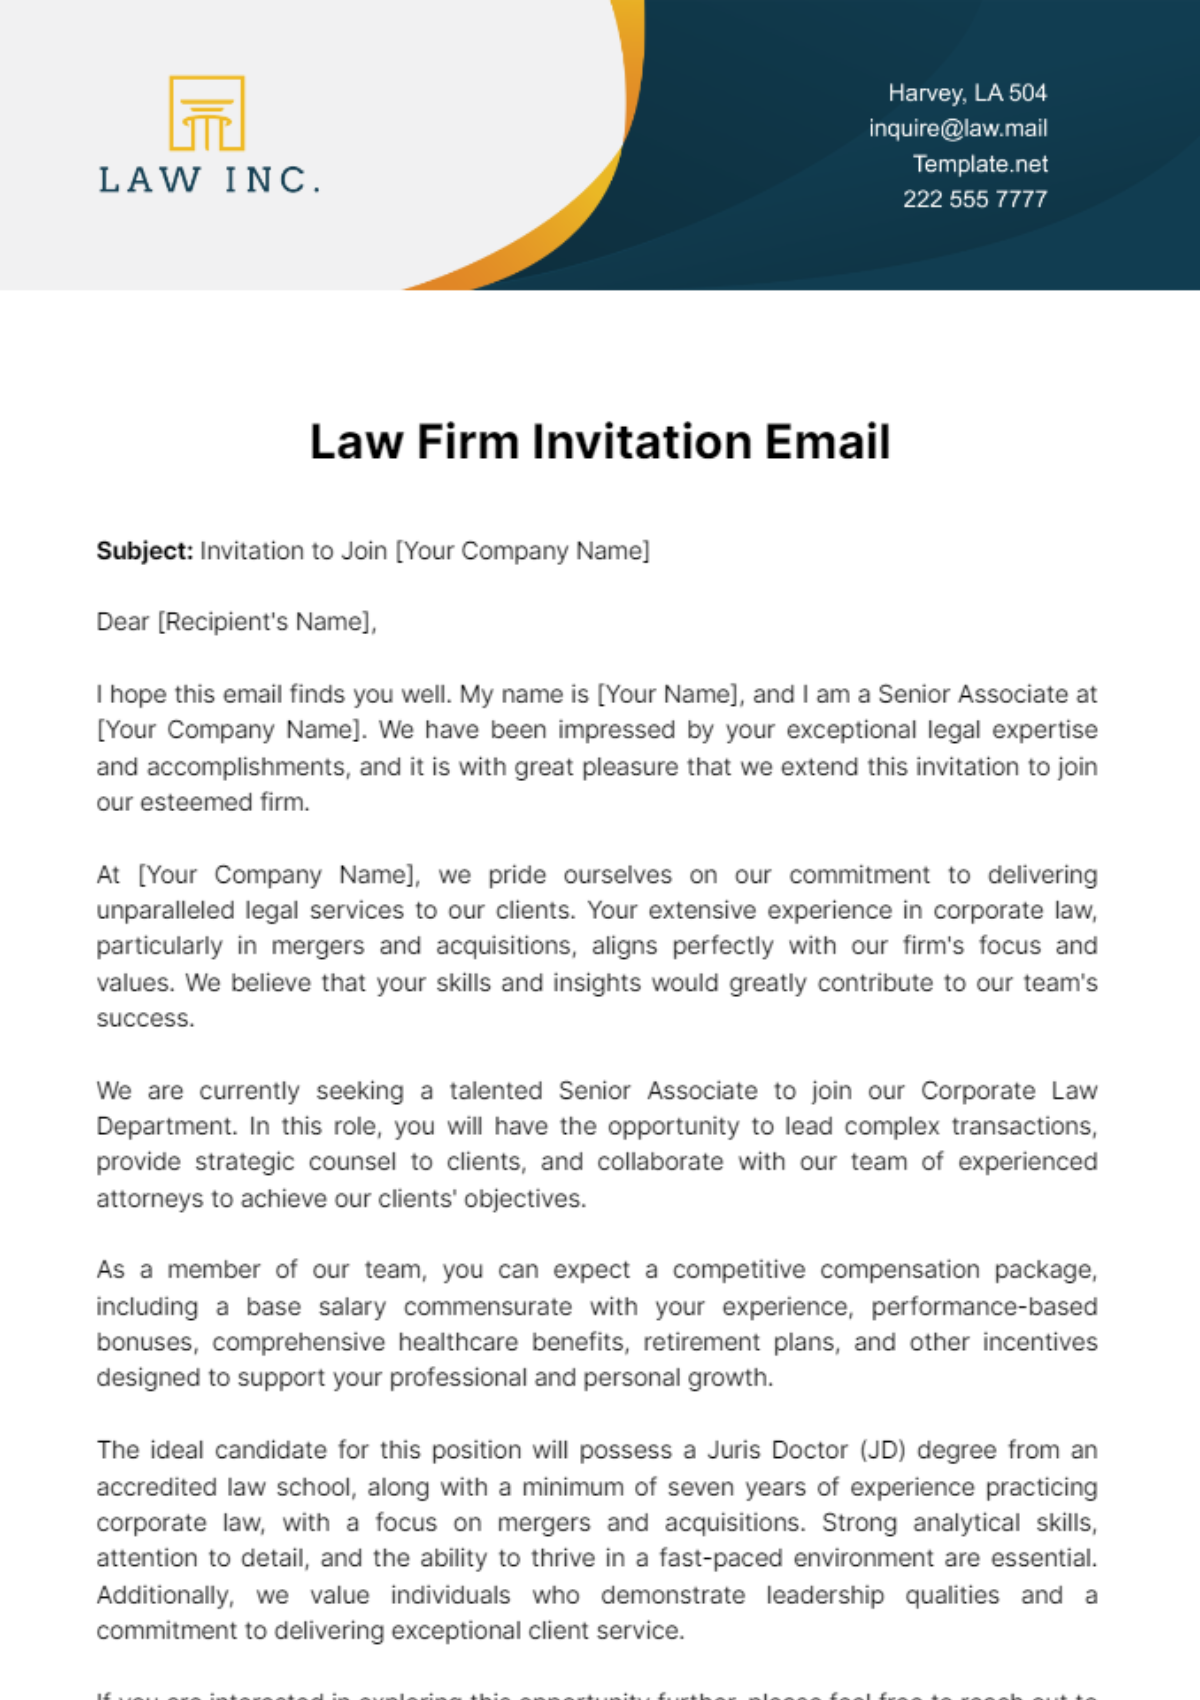 Free Law Firm Invitation Email Template